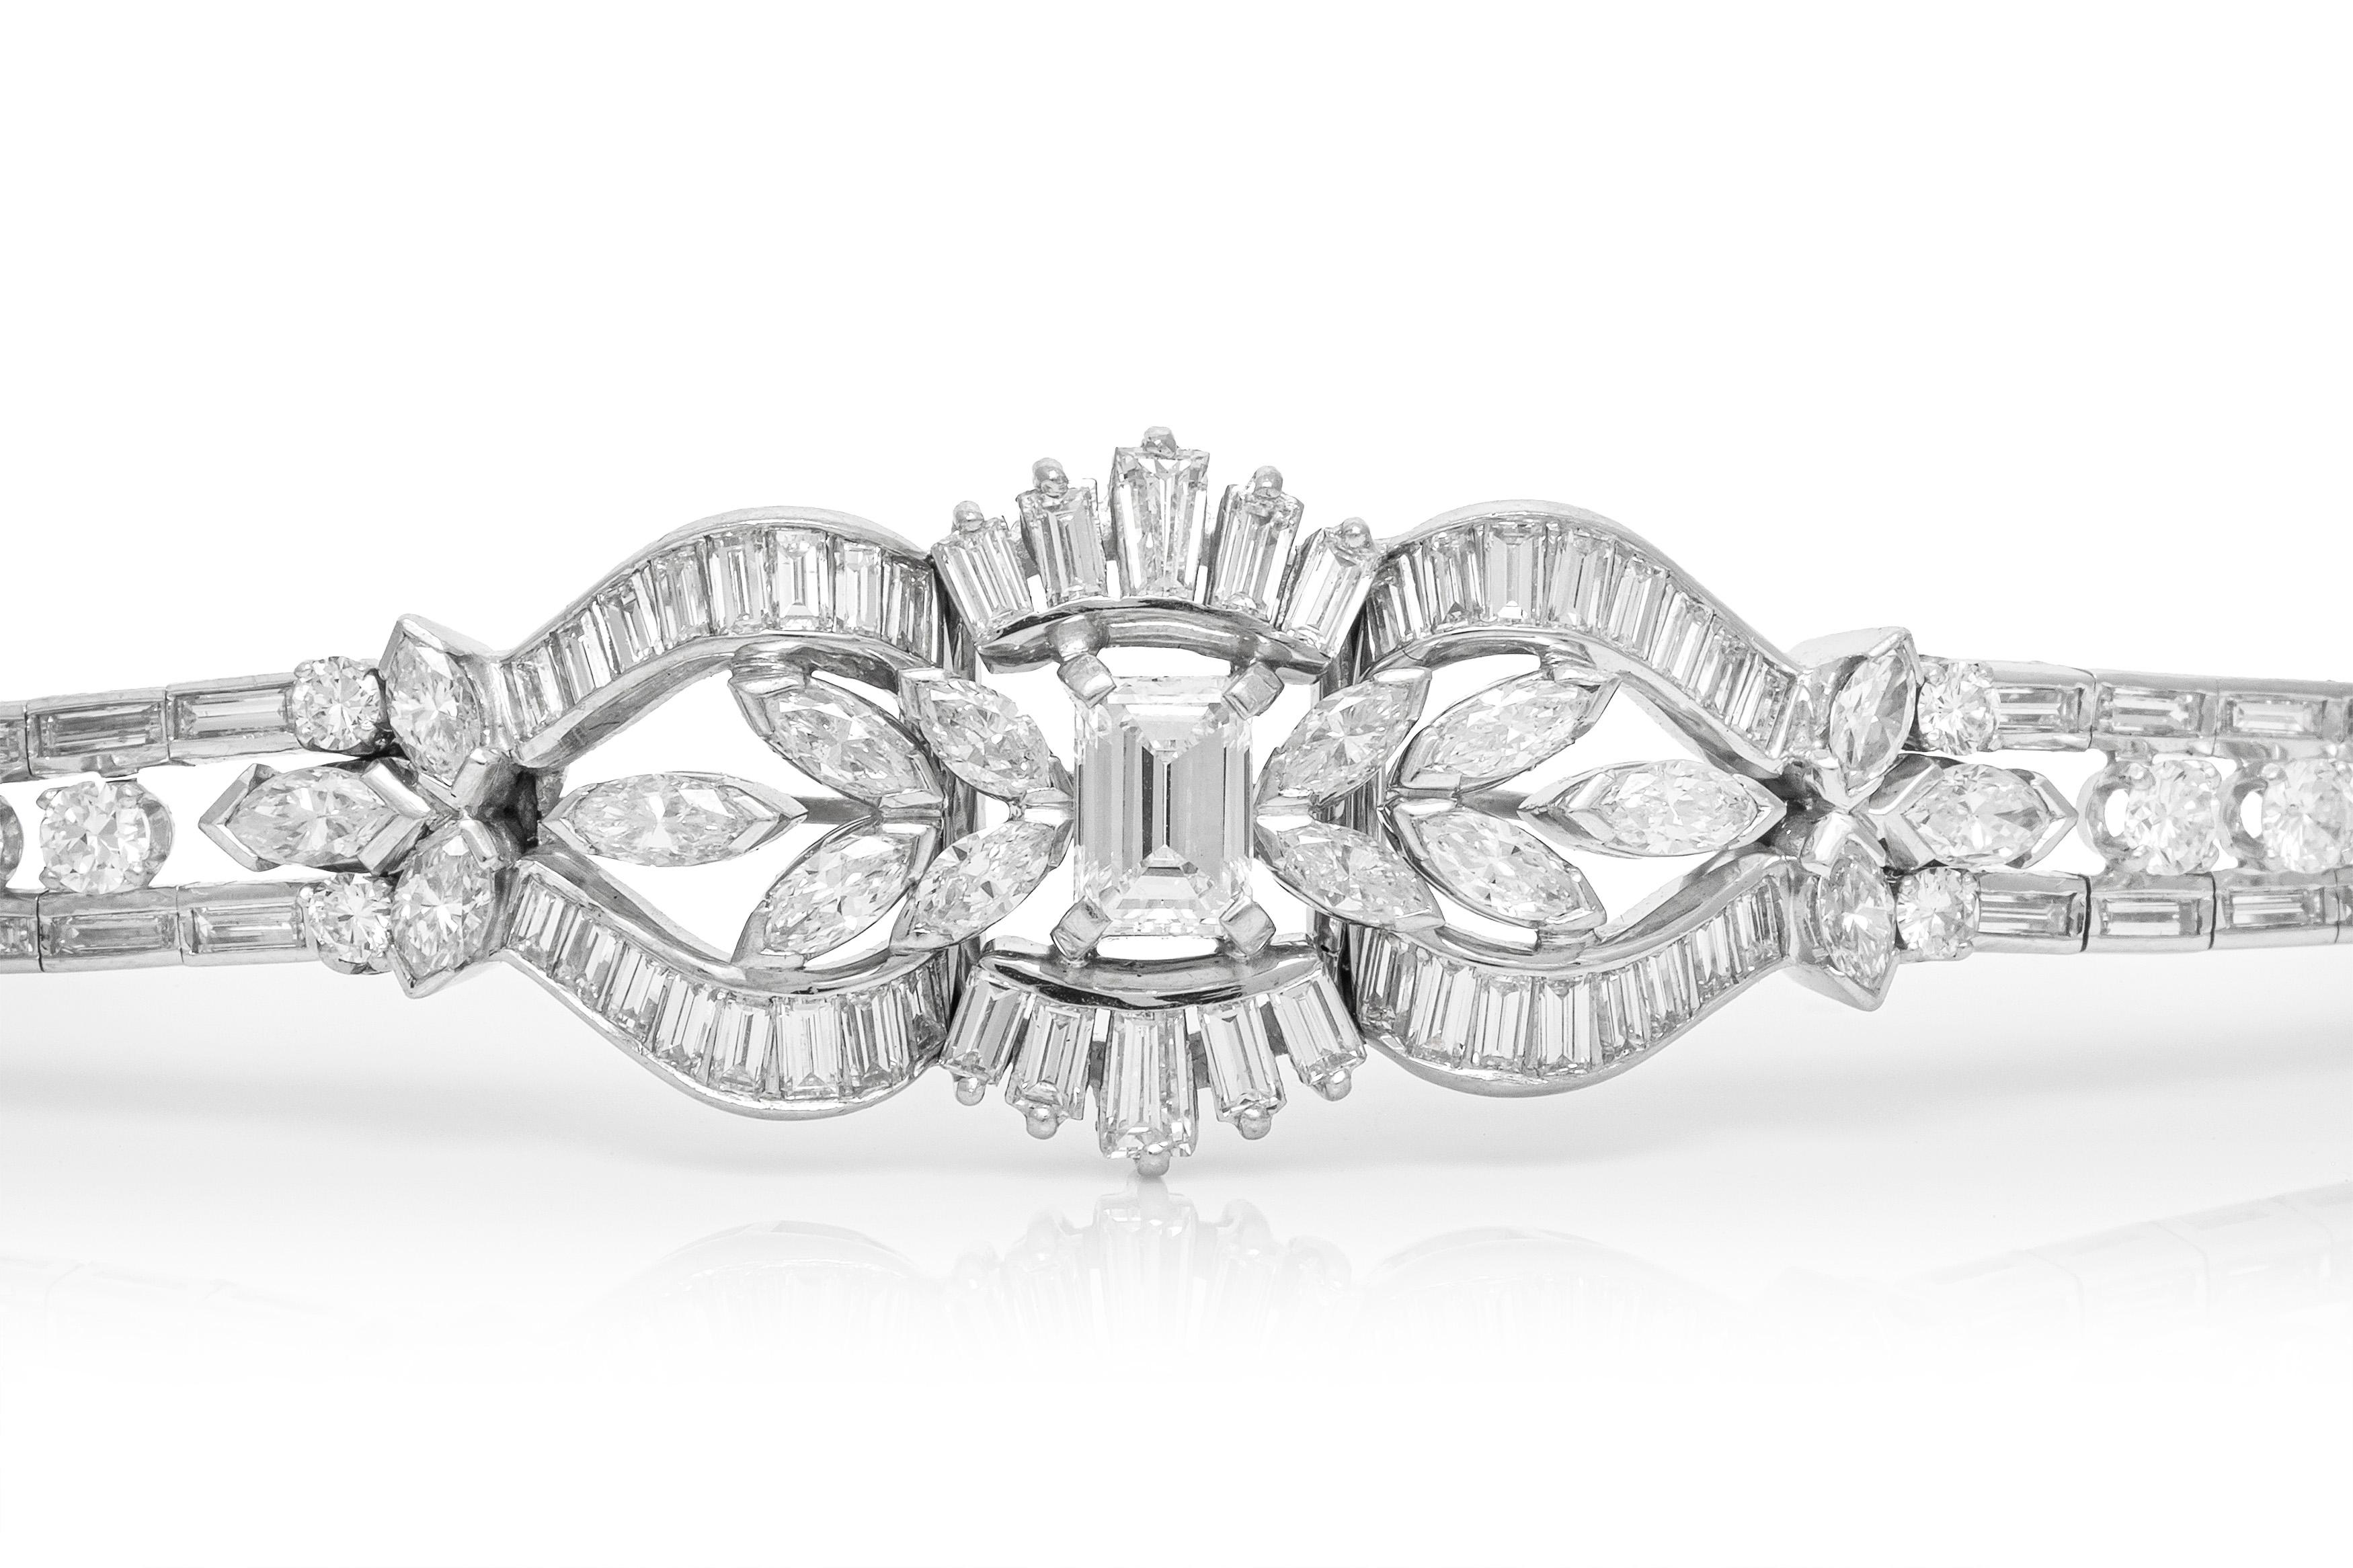 Bracelet, finely crafted in platinum with an emerald cut diamond center stone weighing approximately a total of 1.50 carat and additional diamonds weighing approximately a total of 12.00 carat. Circa 1950's.